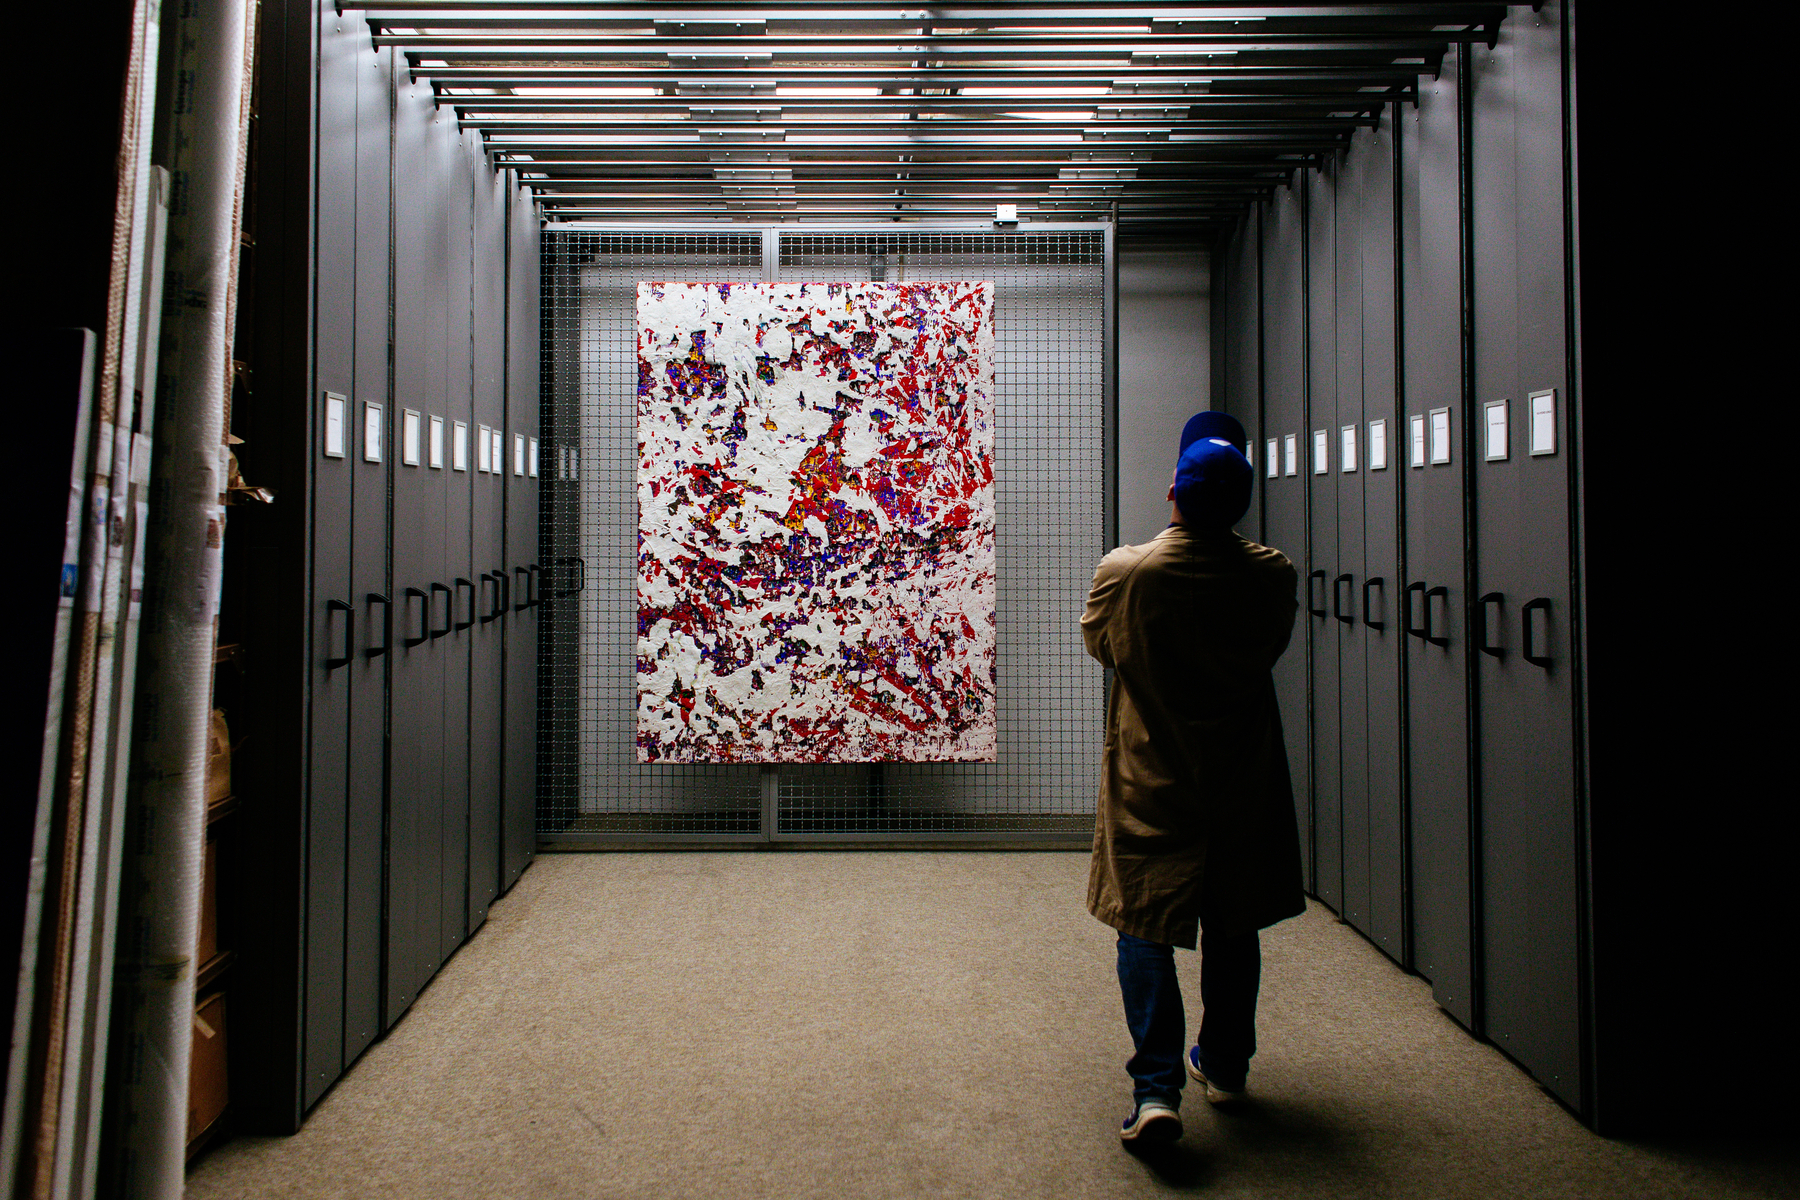 Person in a blue cap and beige coat observing a large abstract painting displayed on a wire mesh wall at the end of a corridor lined with gray lockers.